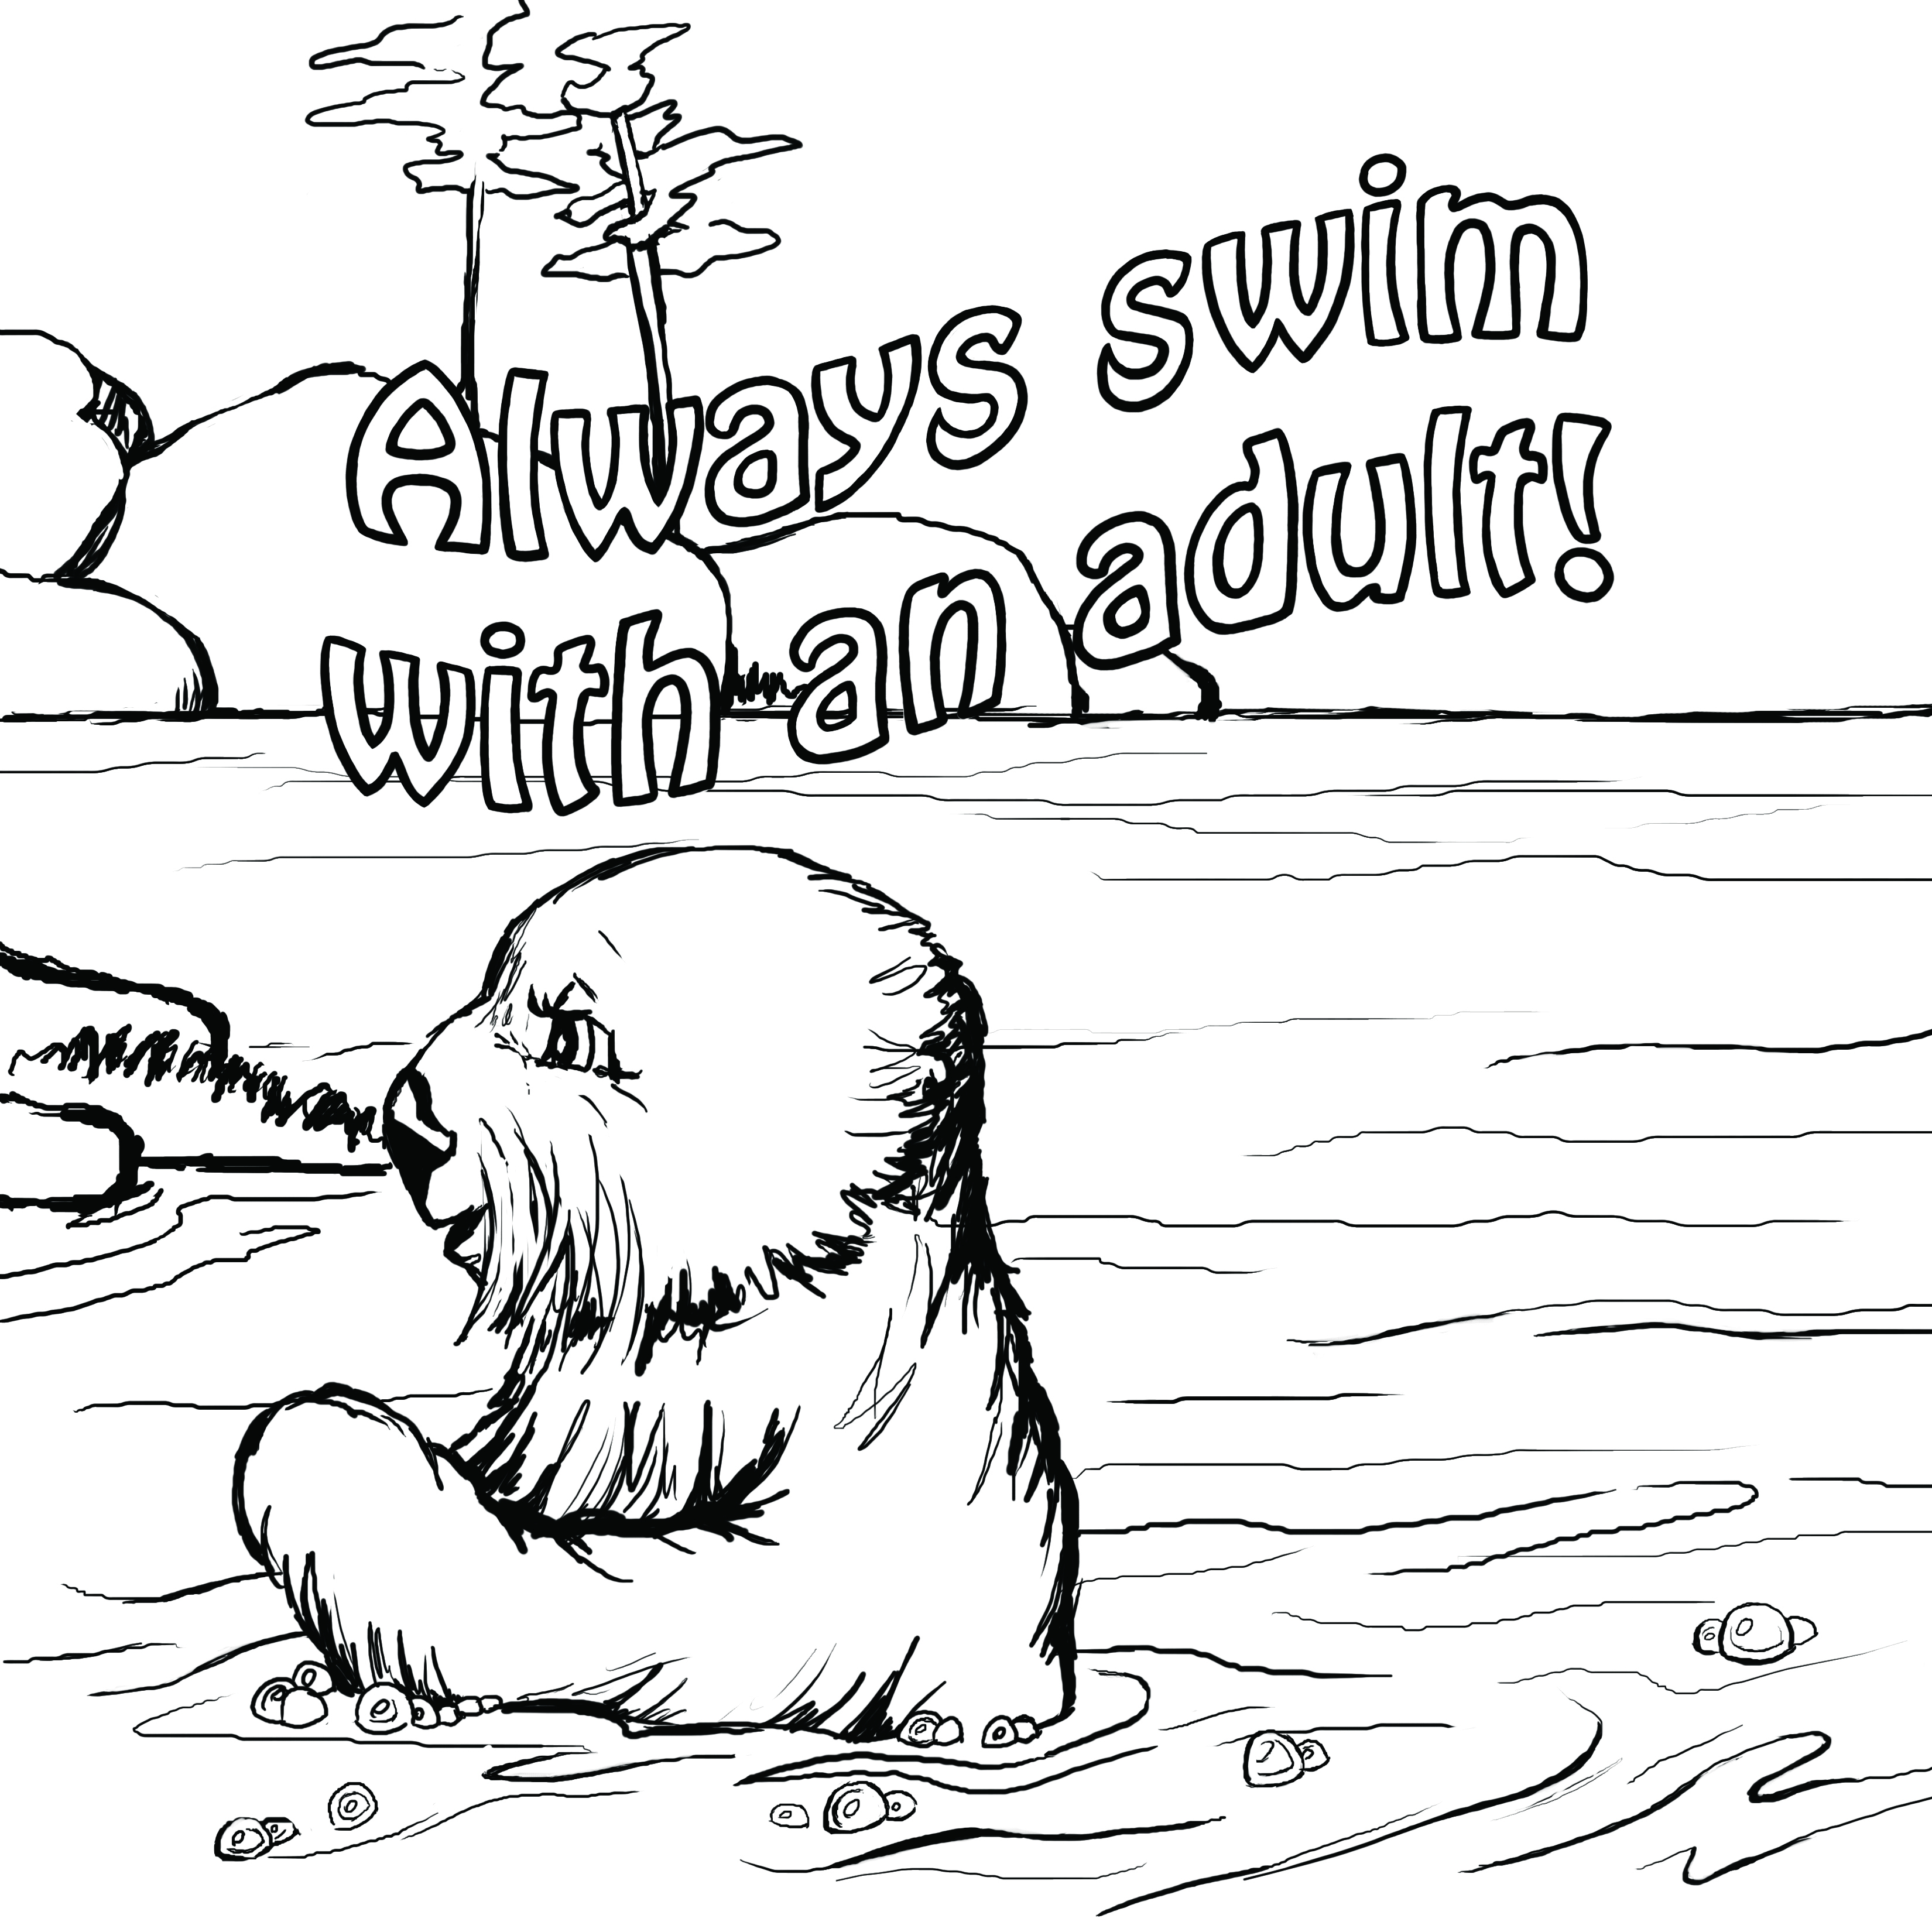 Summer Safety Coloring Pages 4 Coloring Pages Of Water Free Coloring Pages Of Water Safety